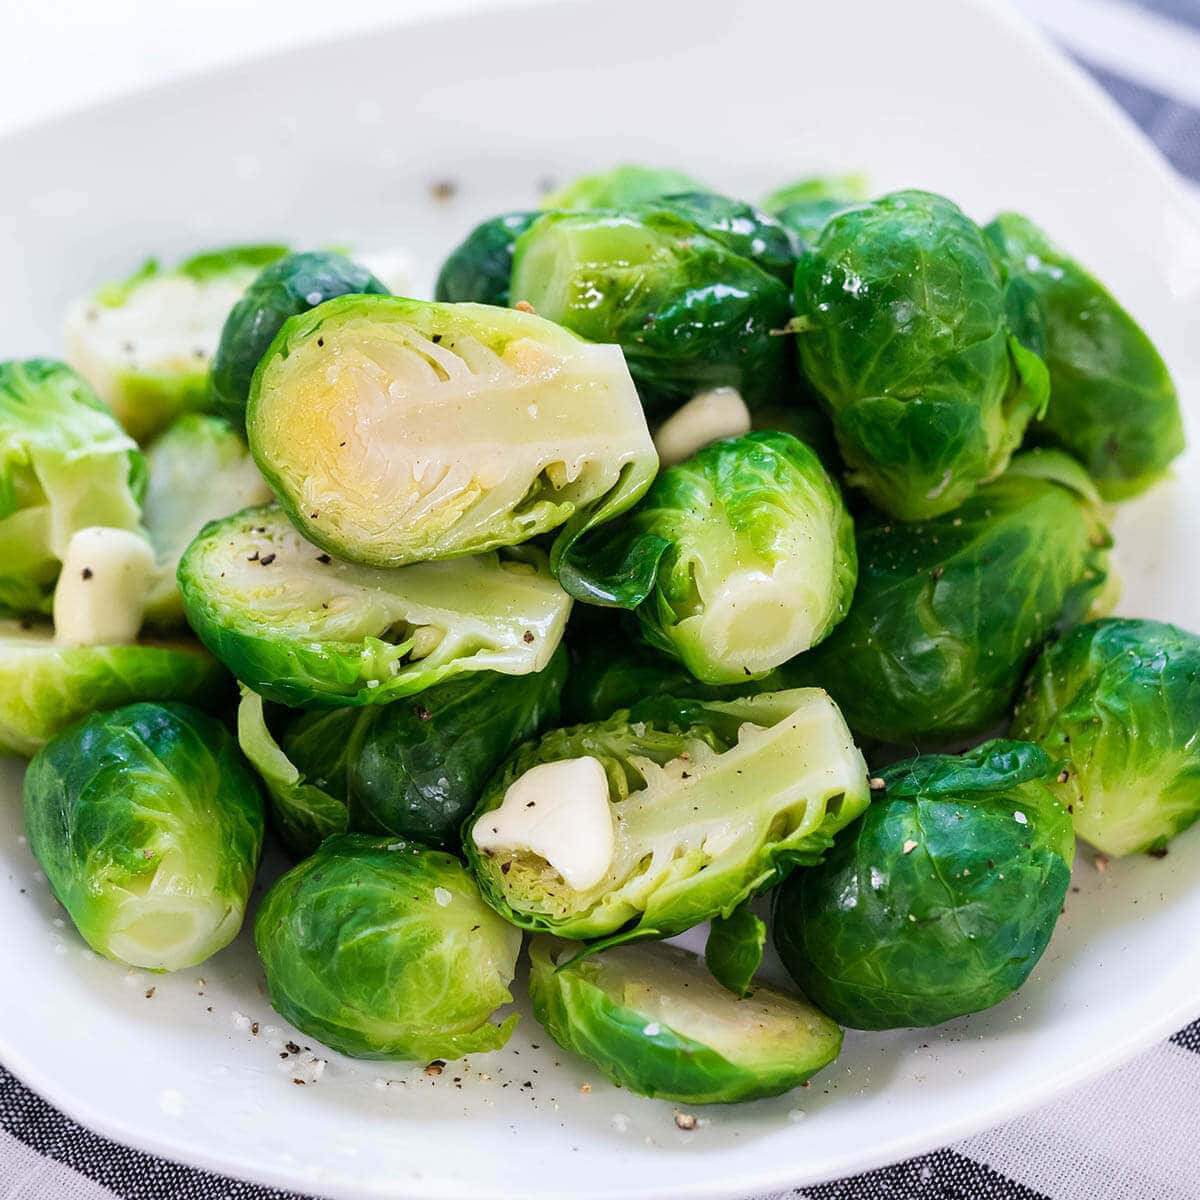 How to Store, Clean and Steam Brussels Sprouts